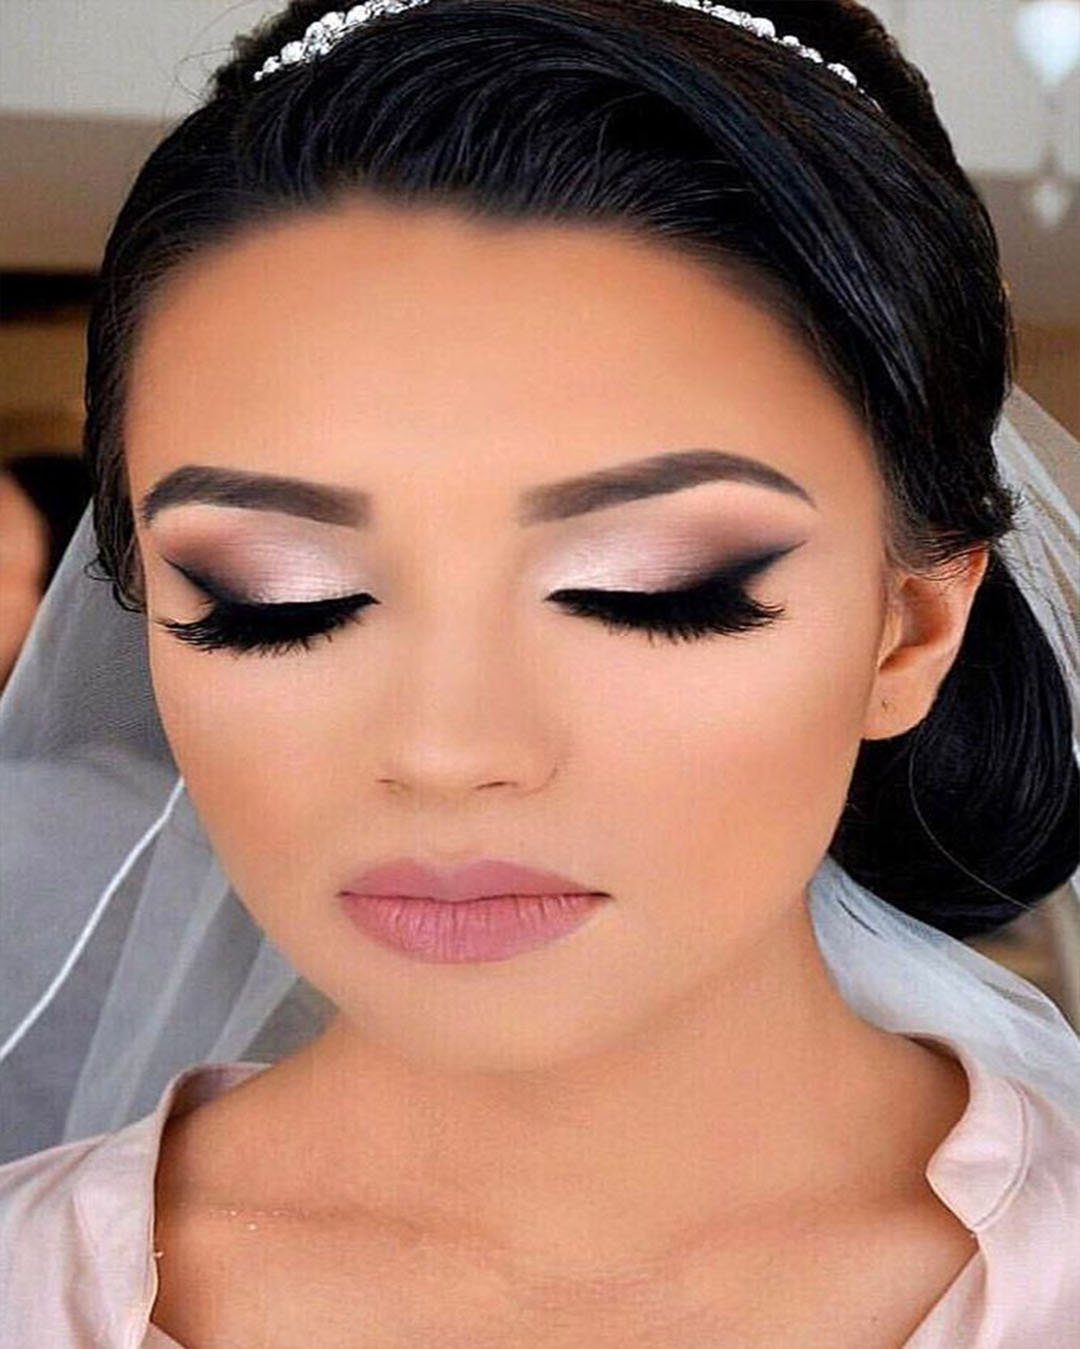 Makeup for elegant and easy wedding